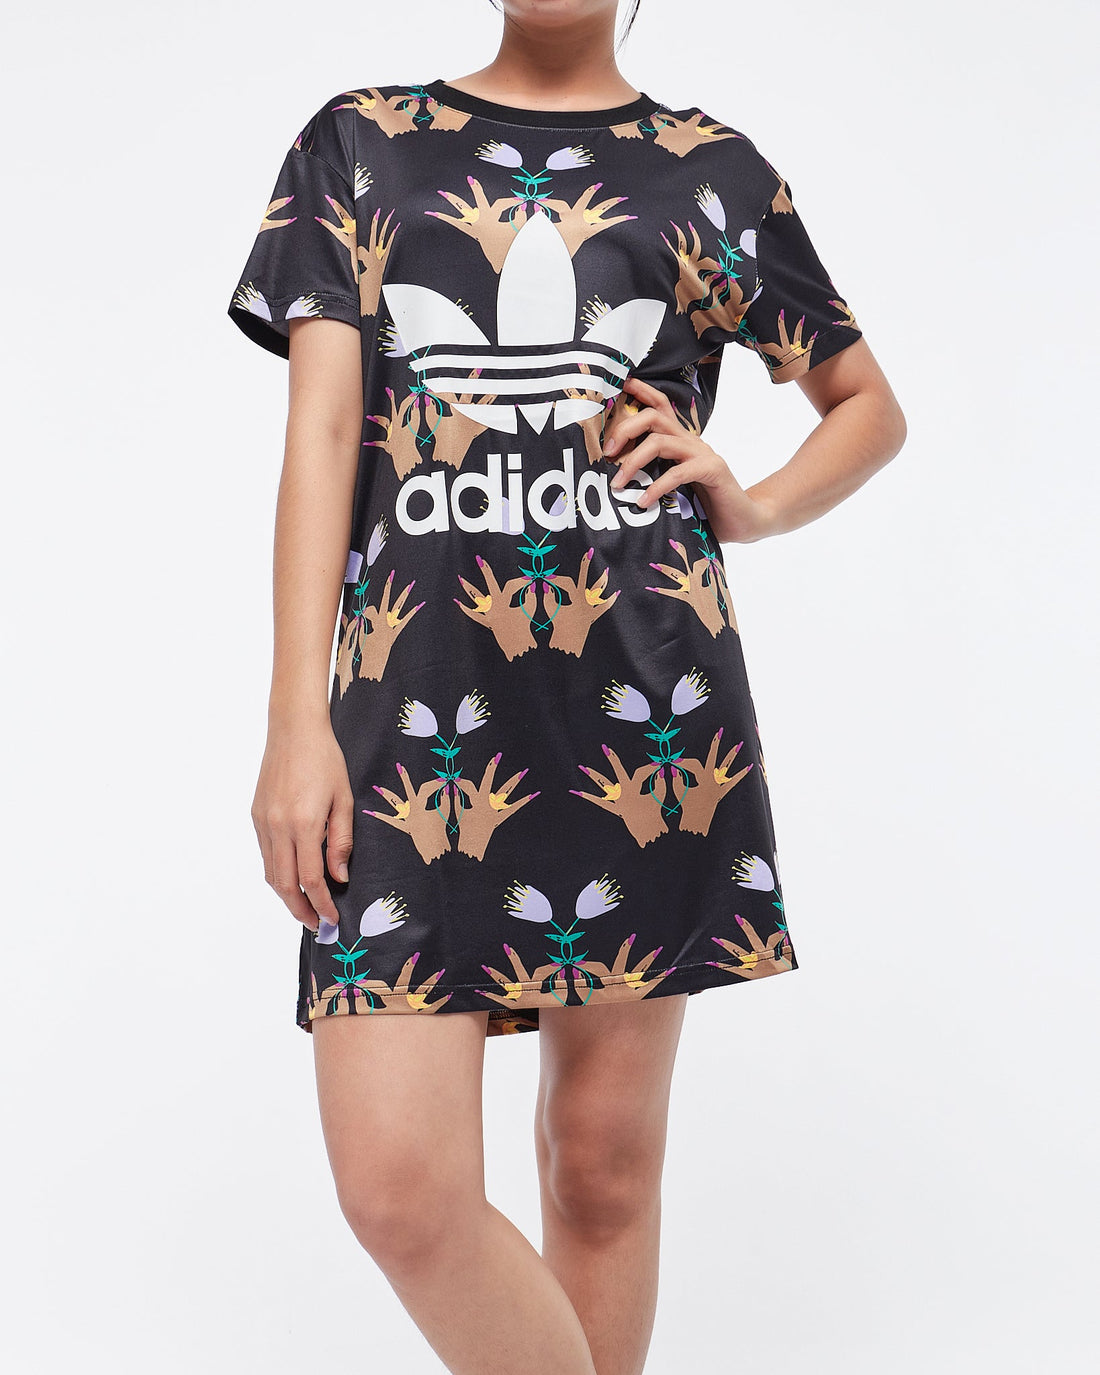 MOI OUTFIT-AD Floral Over Printed Lady T-Shirt Dress 22.90